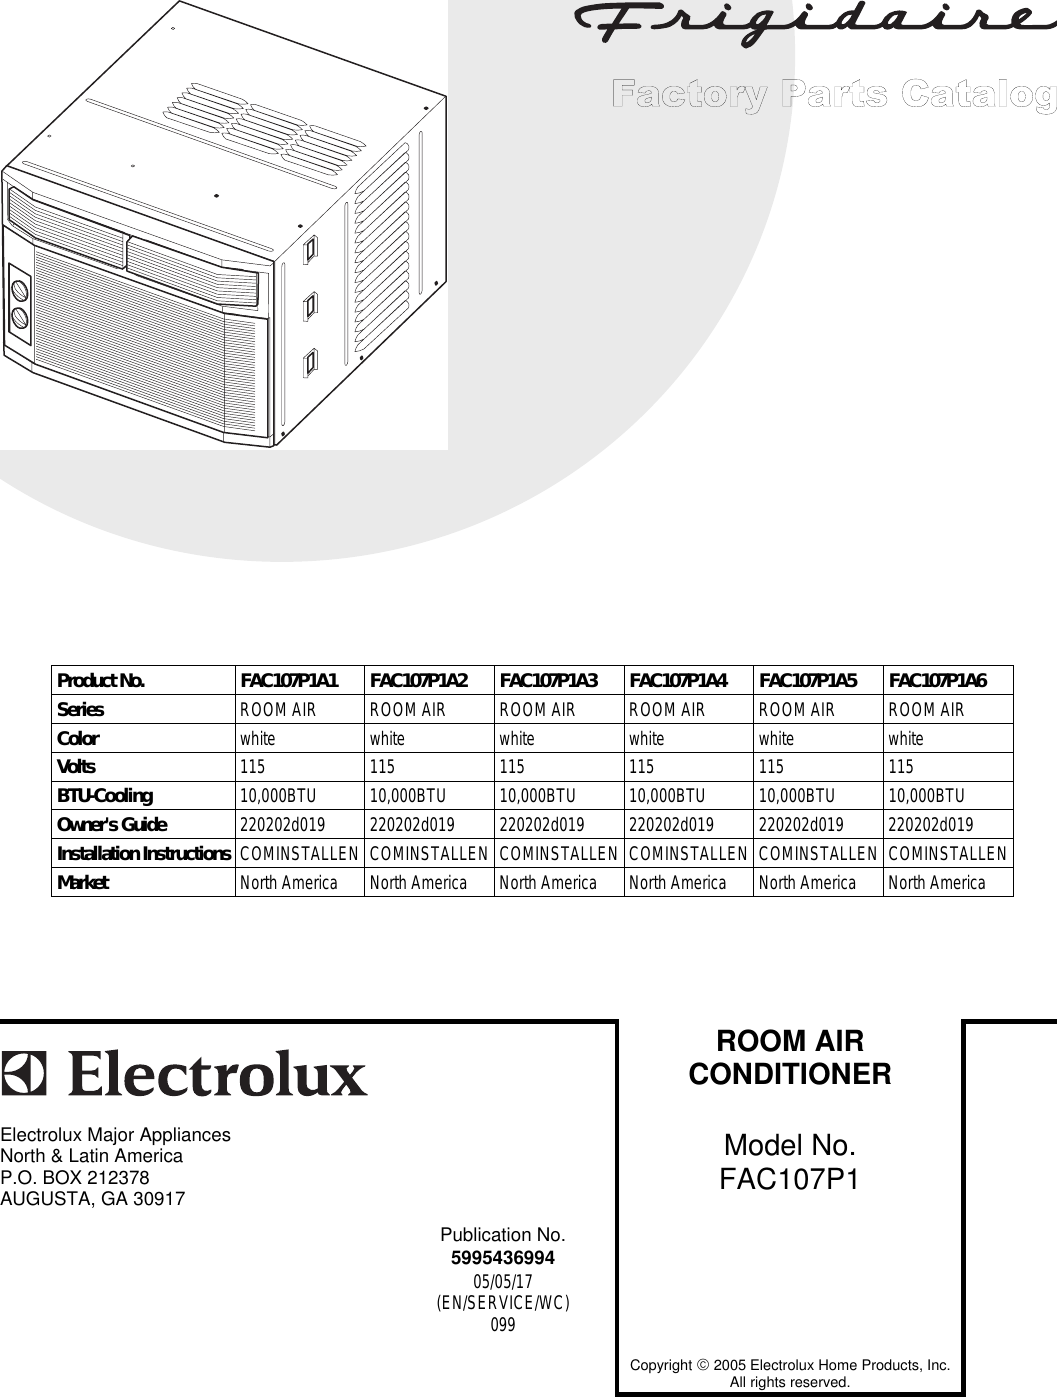 Frigidaire Fac107P1 Users Manual ManualsLib Makes It Easy To Find Manuals  Online!  Frigidaire Air Conditioner Wiring Diagram Fac127p1a    UserManual.wiki